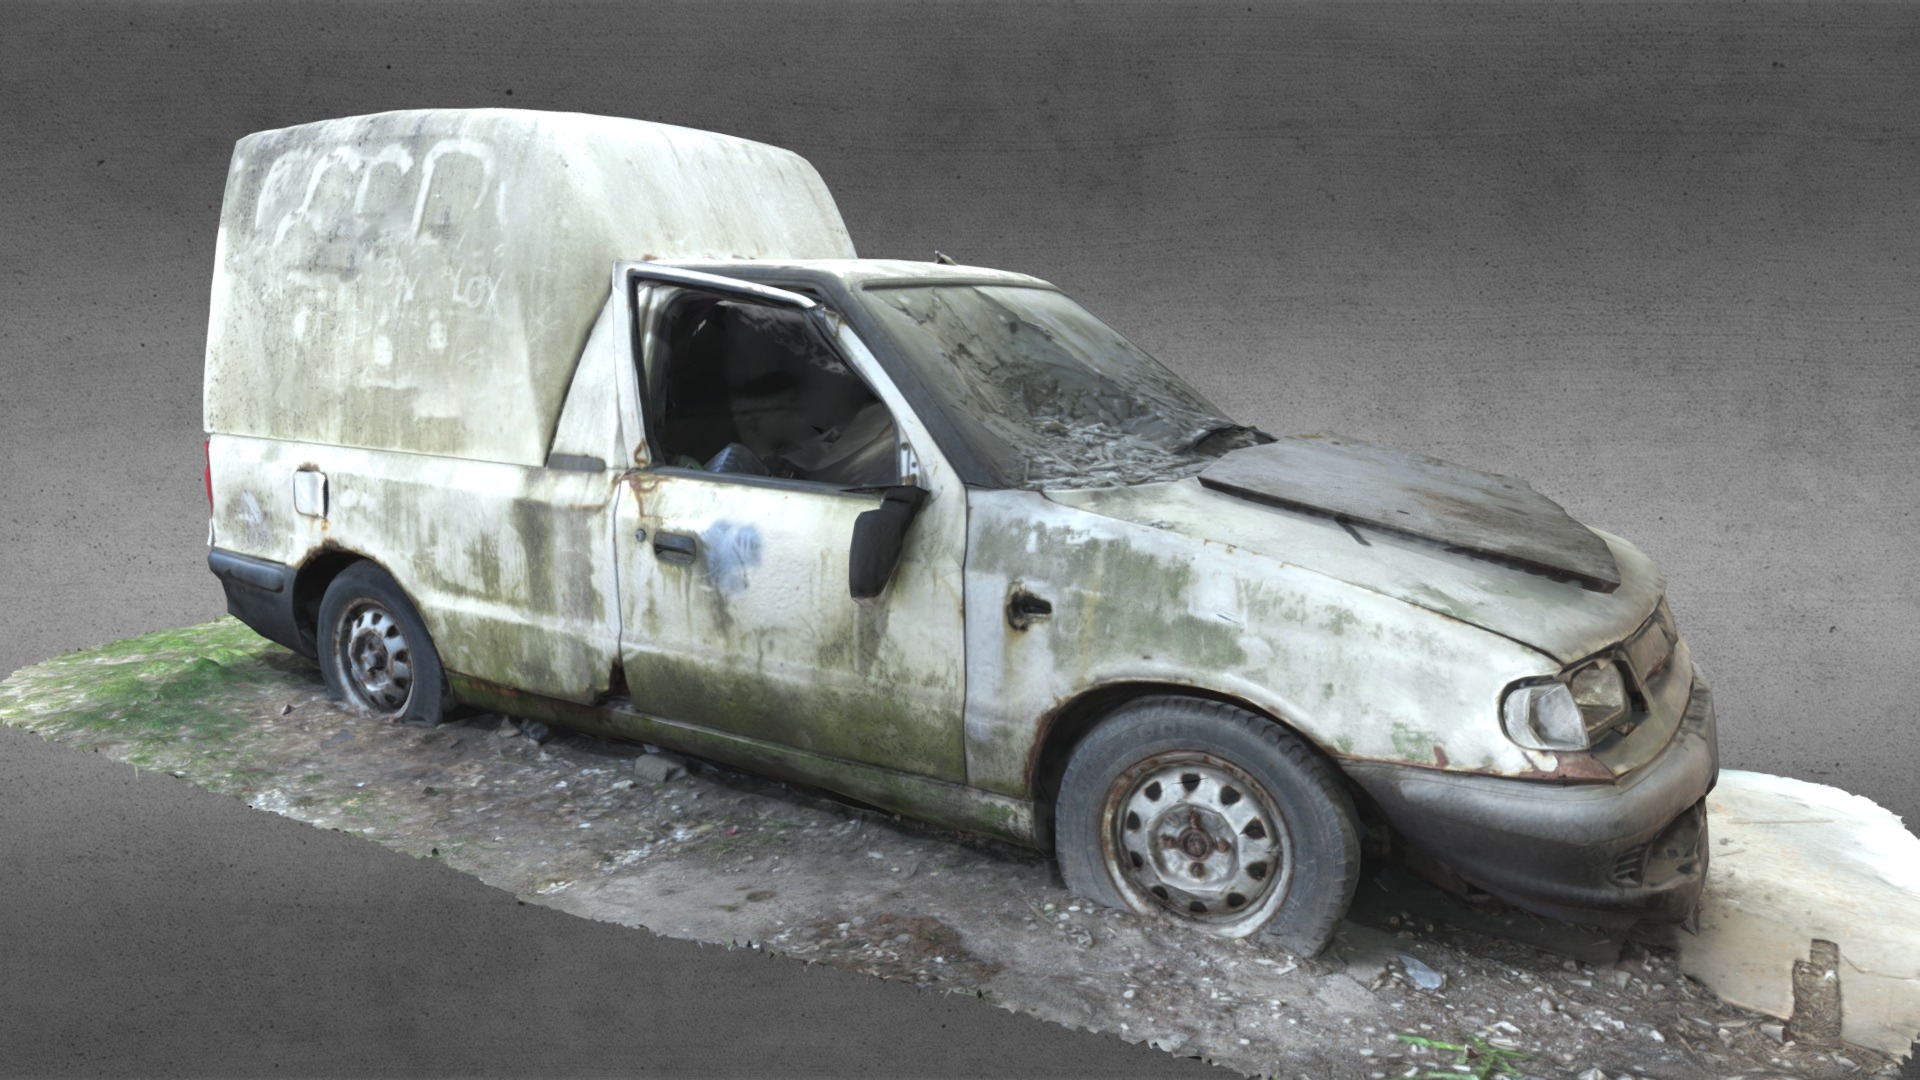 3D model Skoda Felicia Pickup Car Wreck - This is a 3D model of the Skoda Felicia Pickup Car Wreck. The 3D model is about a car with a smashed front end.